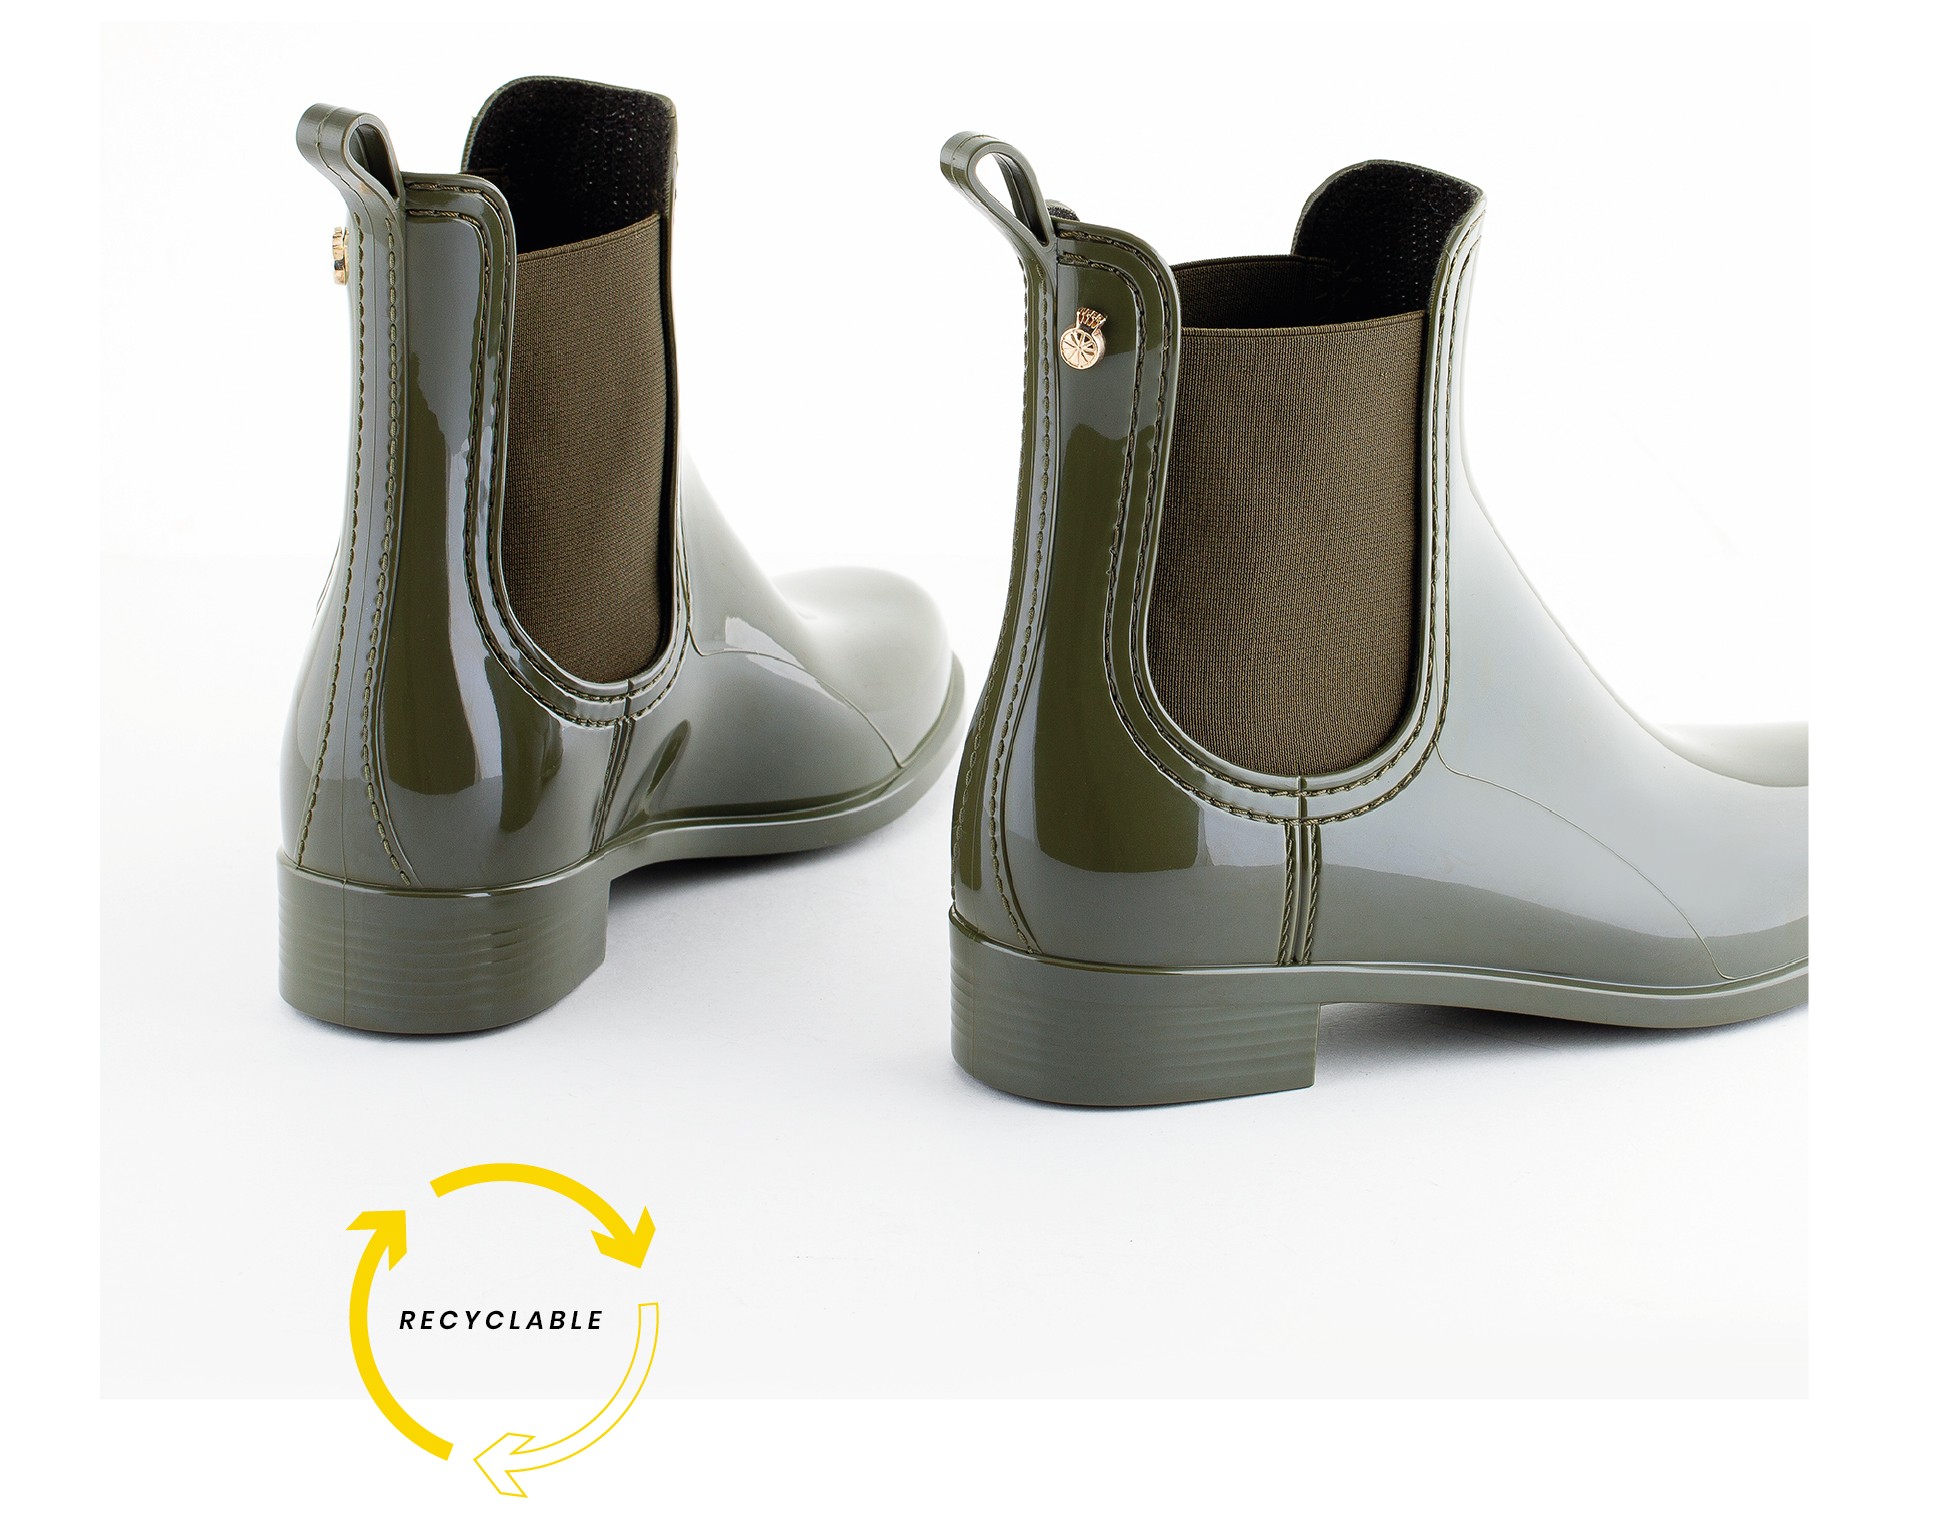 recycled and recyclable ankle boots